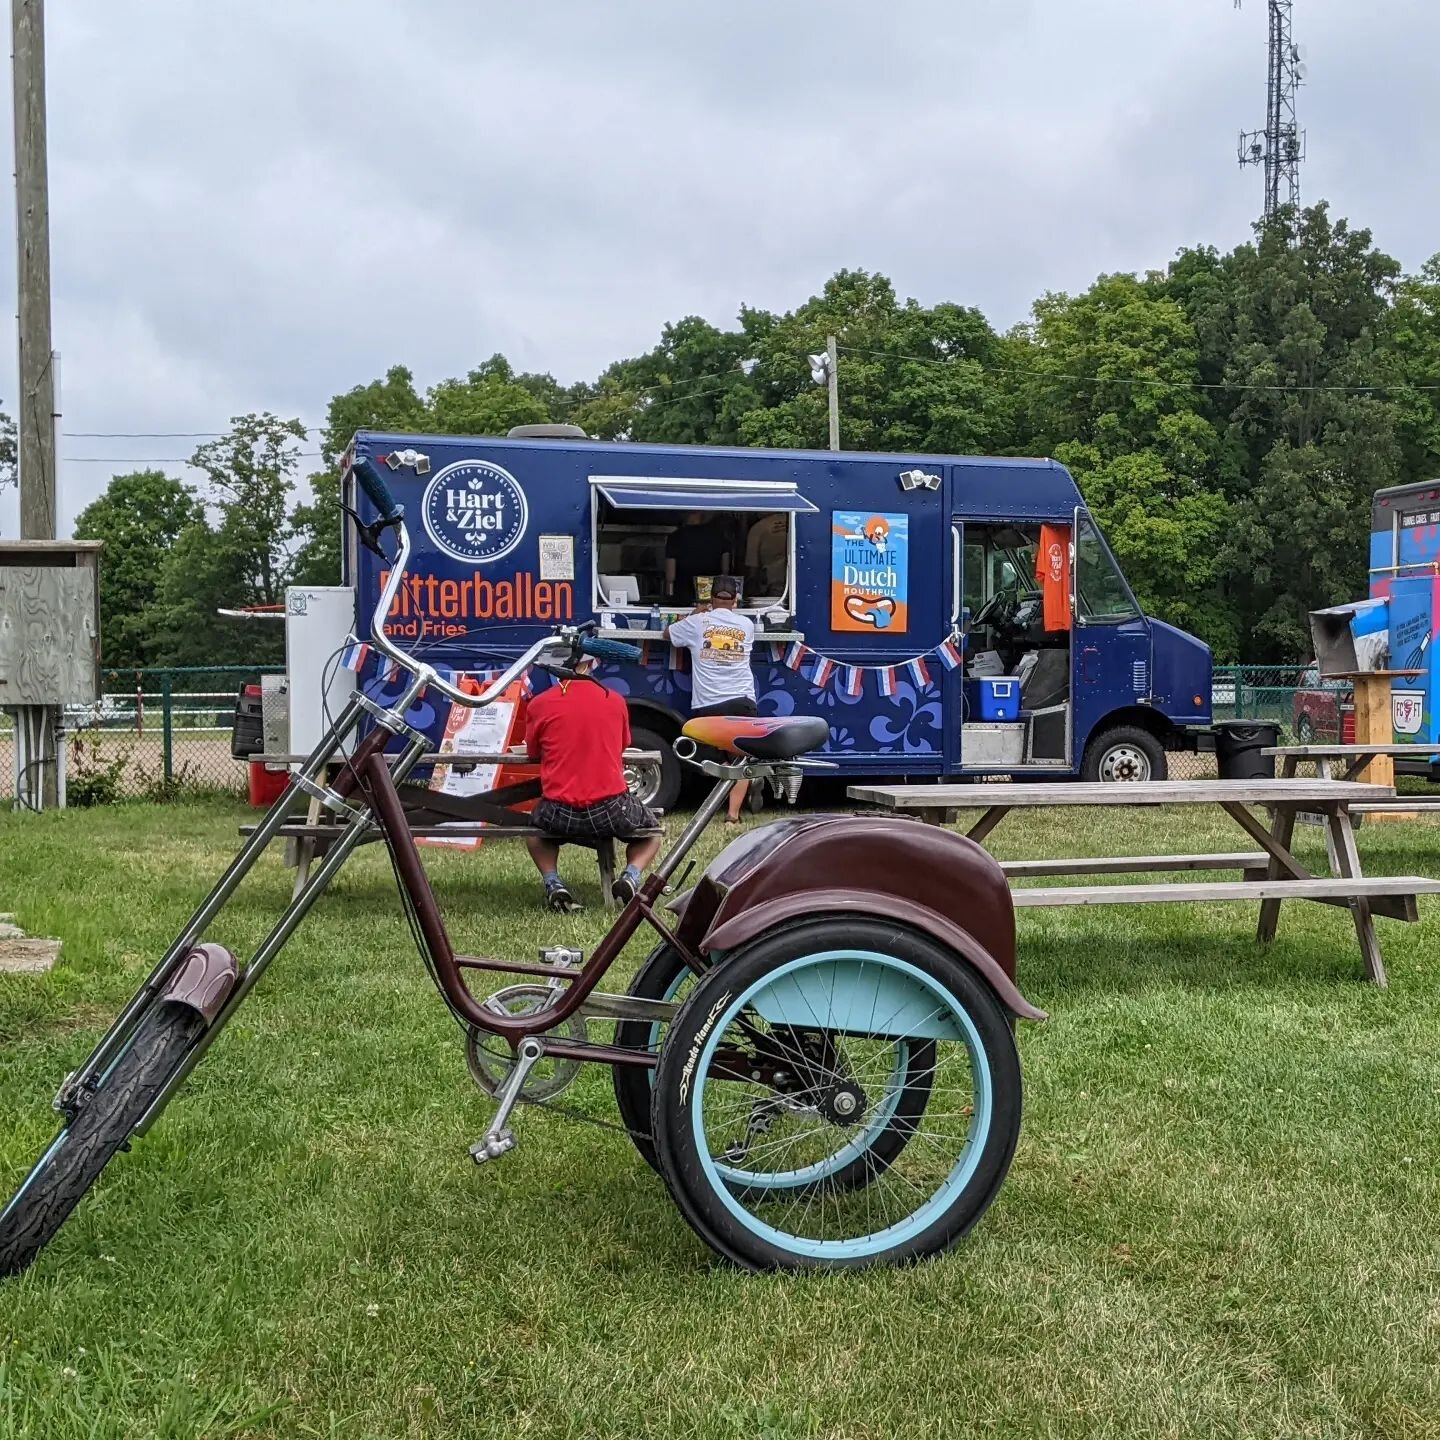 Are you out in the Hamilton area today? Drop by the @rocktonworldsfair grounds to see some awesome pre-60s era cars, some really neat bikes and some amazing vendors @jalopyjamup! 

Serving Gluten Free food all weekend! 

#glutenfreefoodtruck #jalopyj